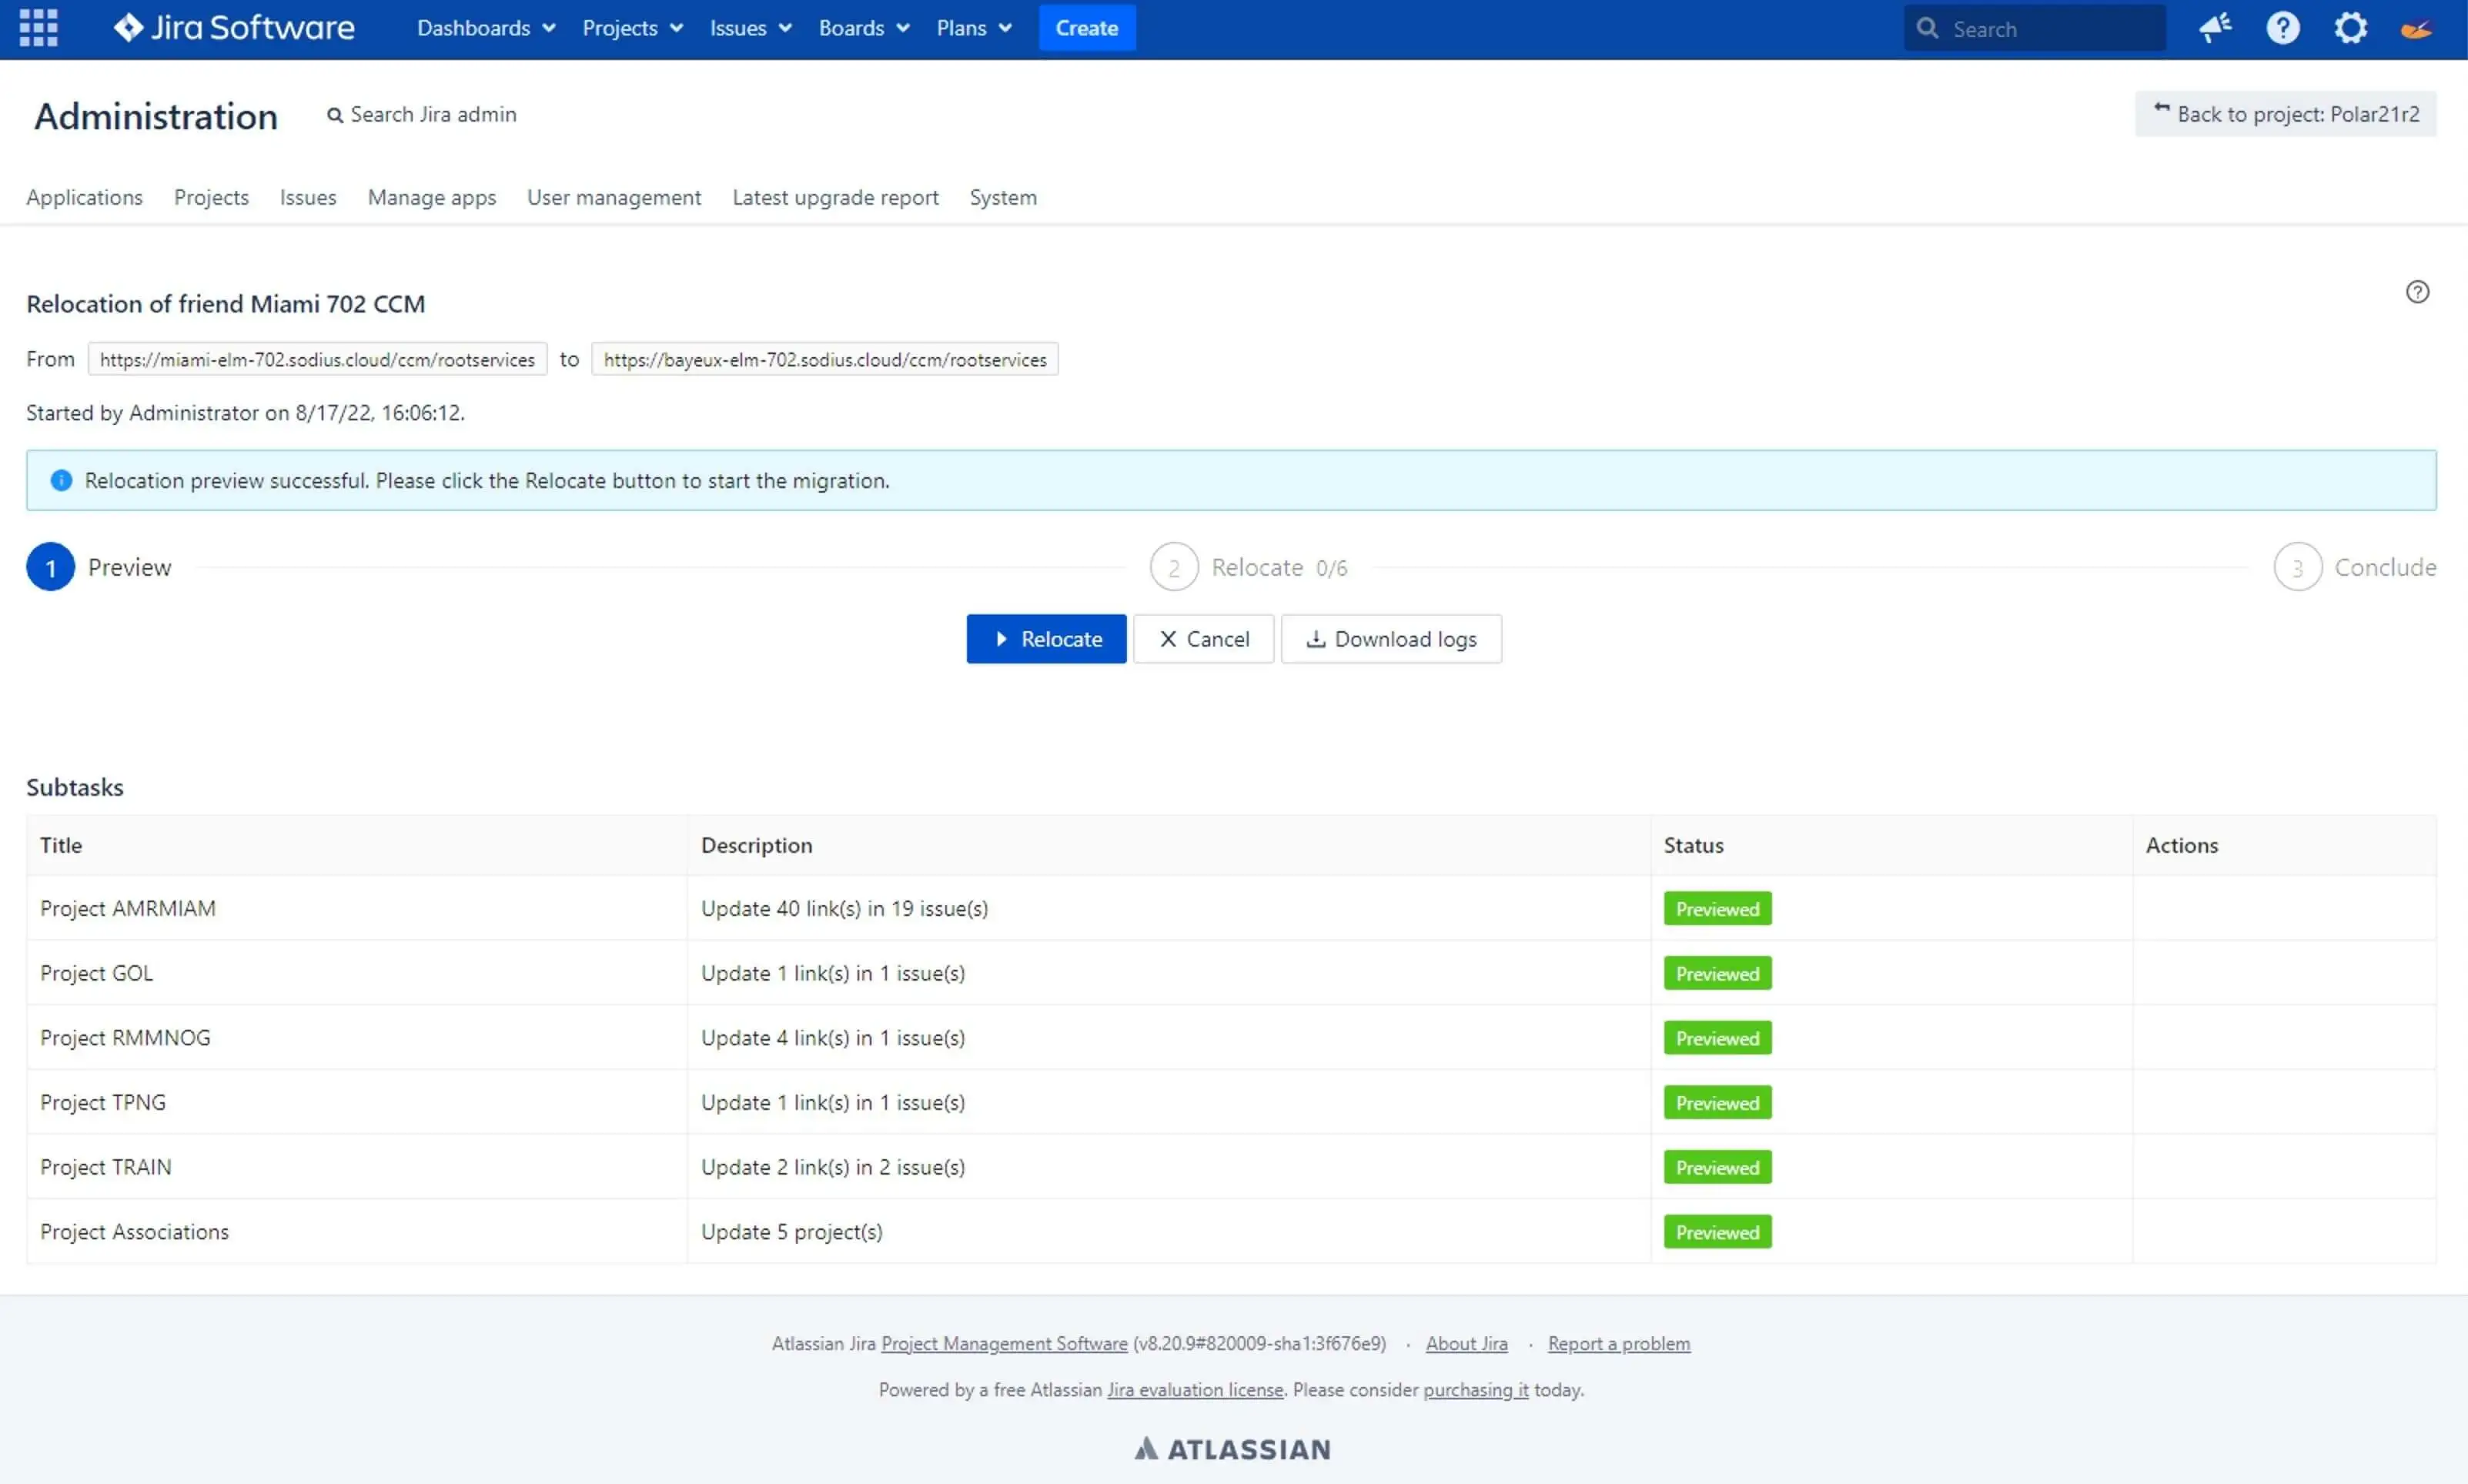 oslc-connect-for-jira-friend-relocation-1